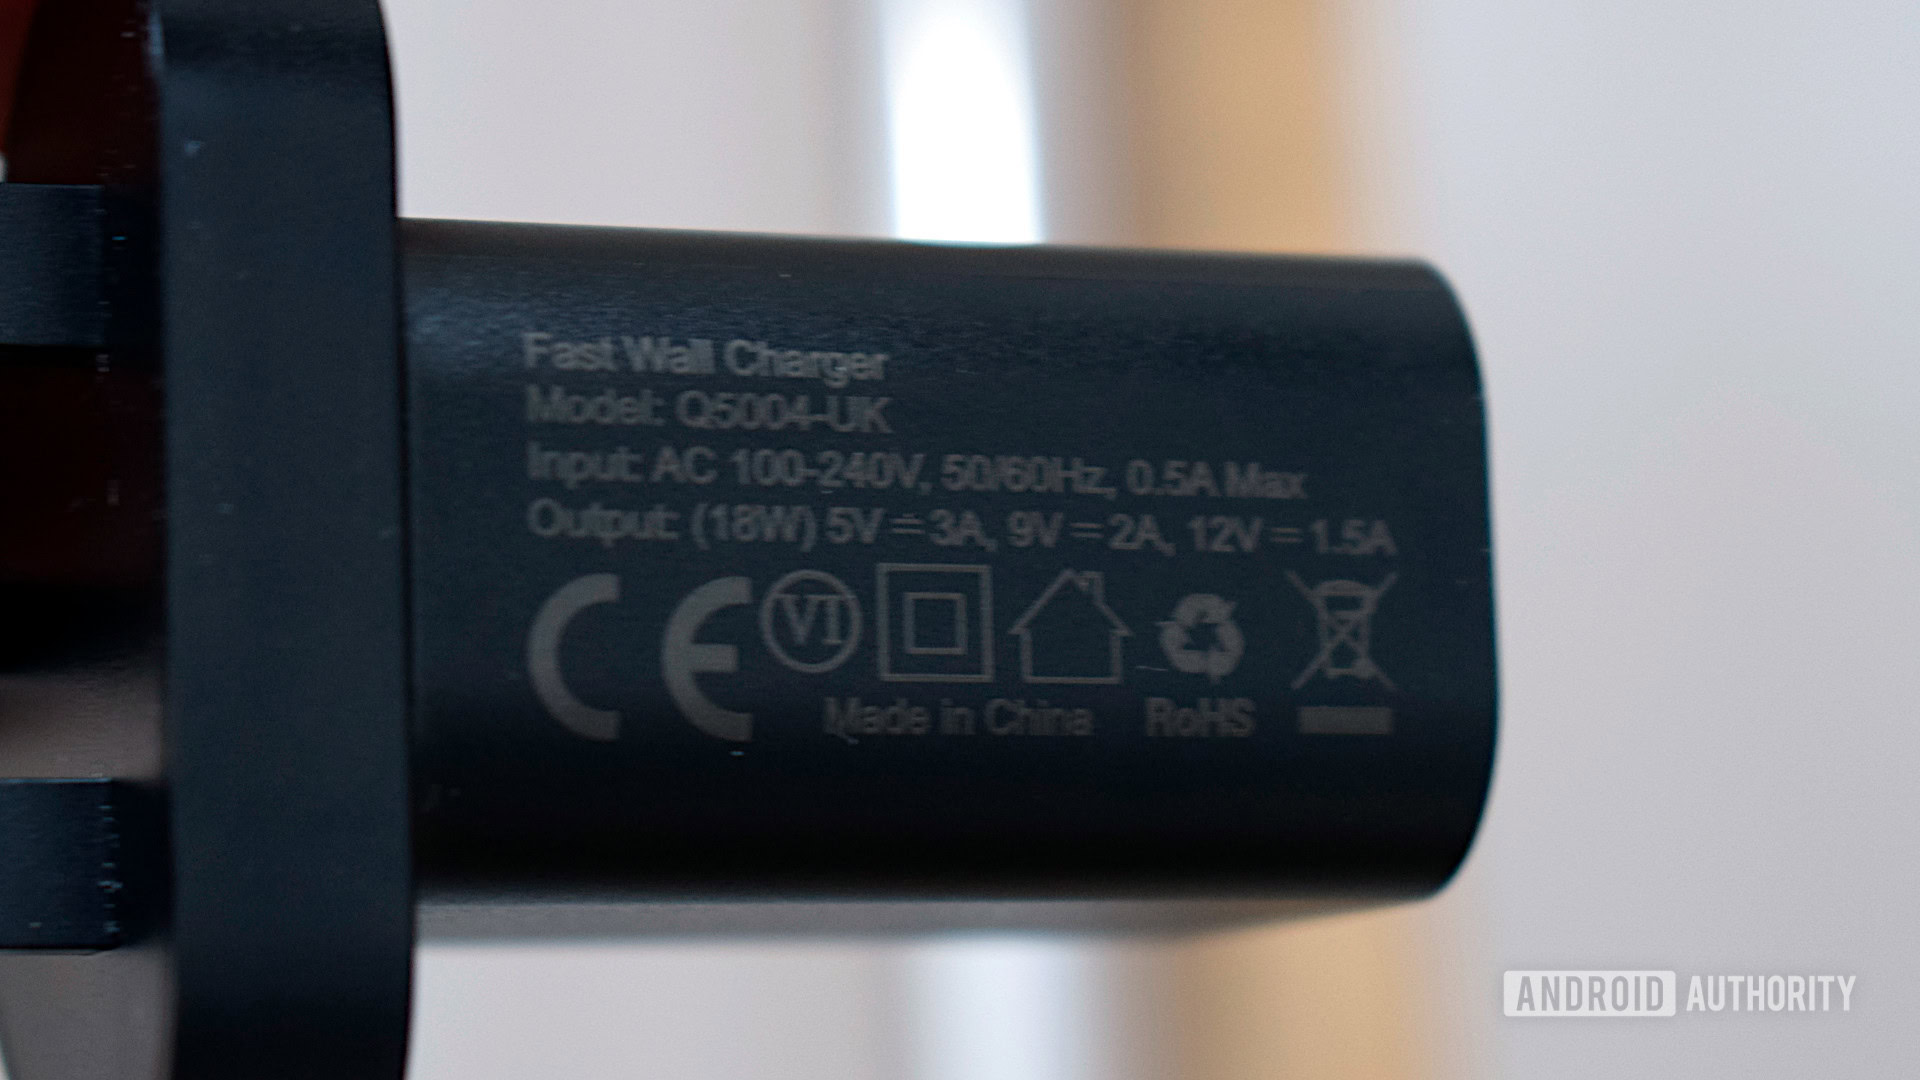 Choetech USB C charger 18W charger specs